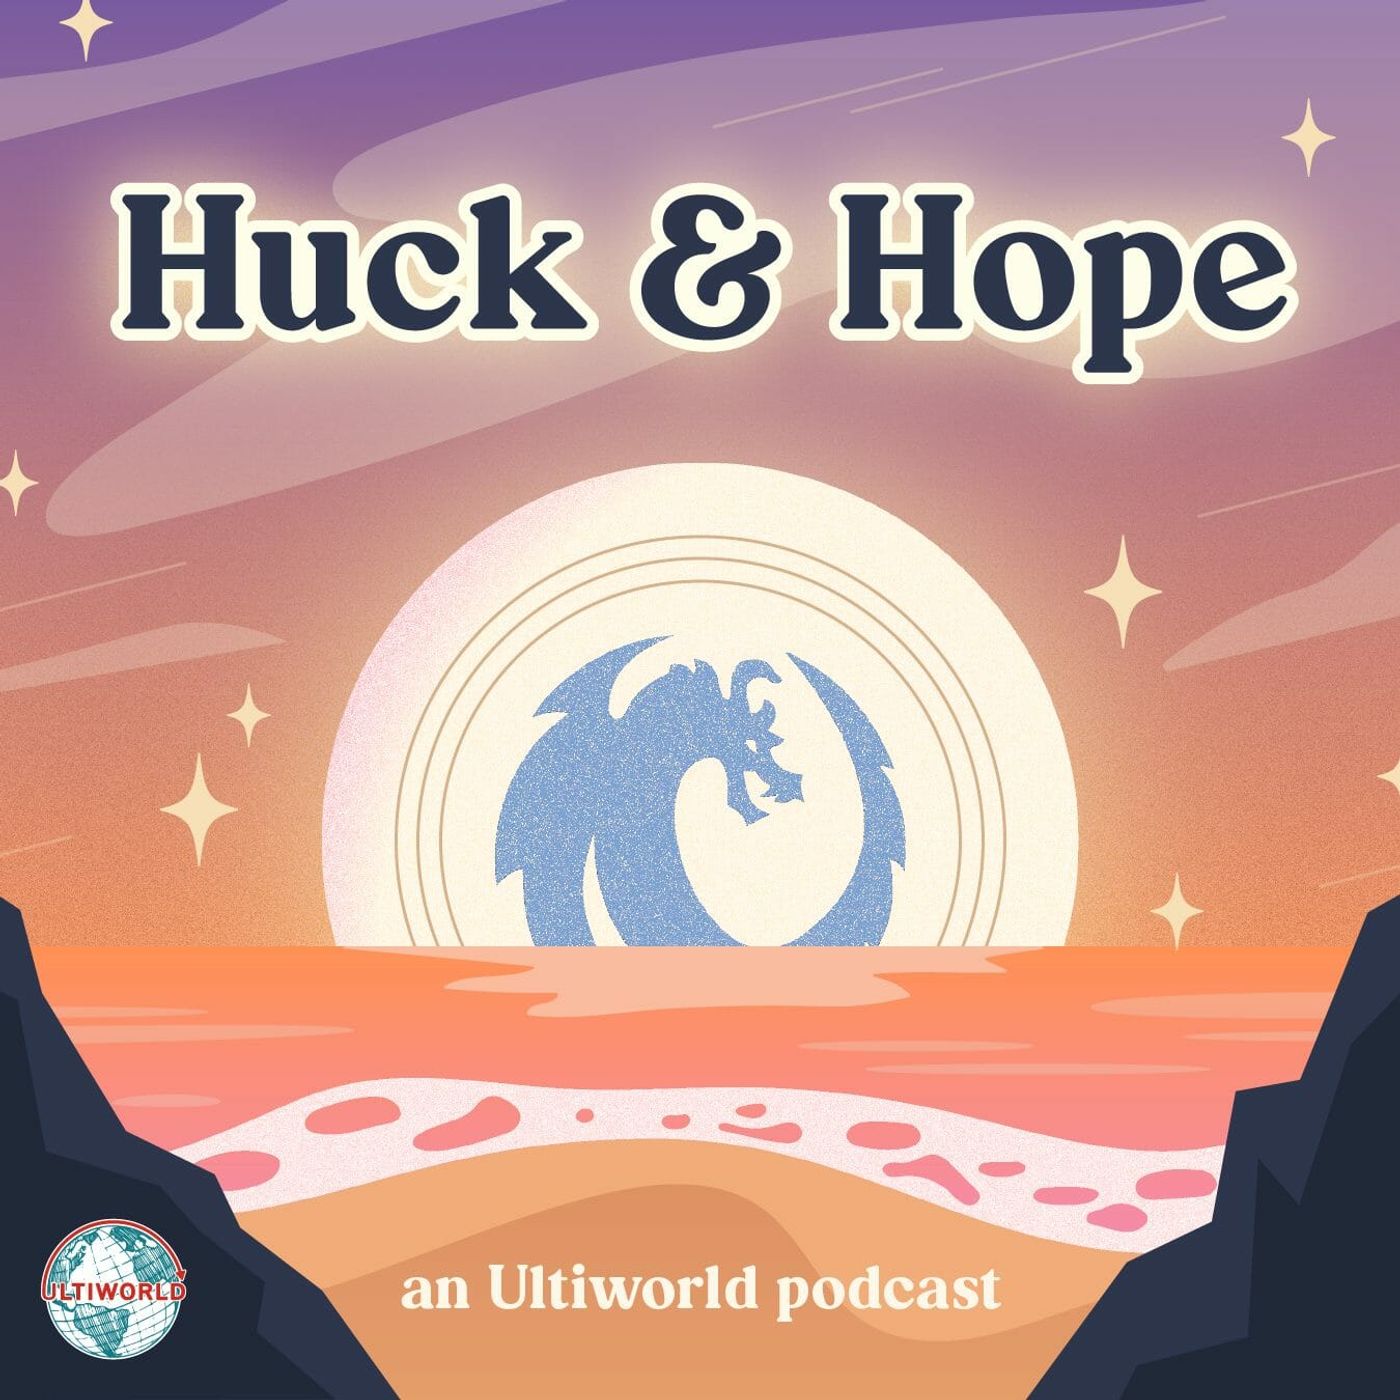 Huck and Hope: Episode 2 - The Fastest Growing Sport in the Nation